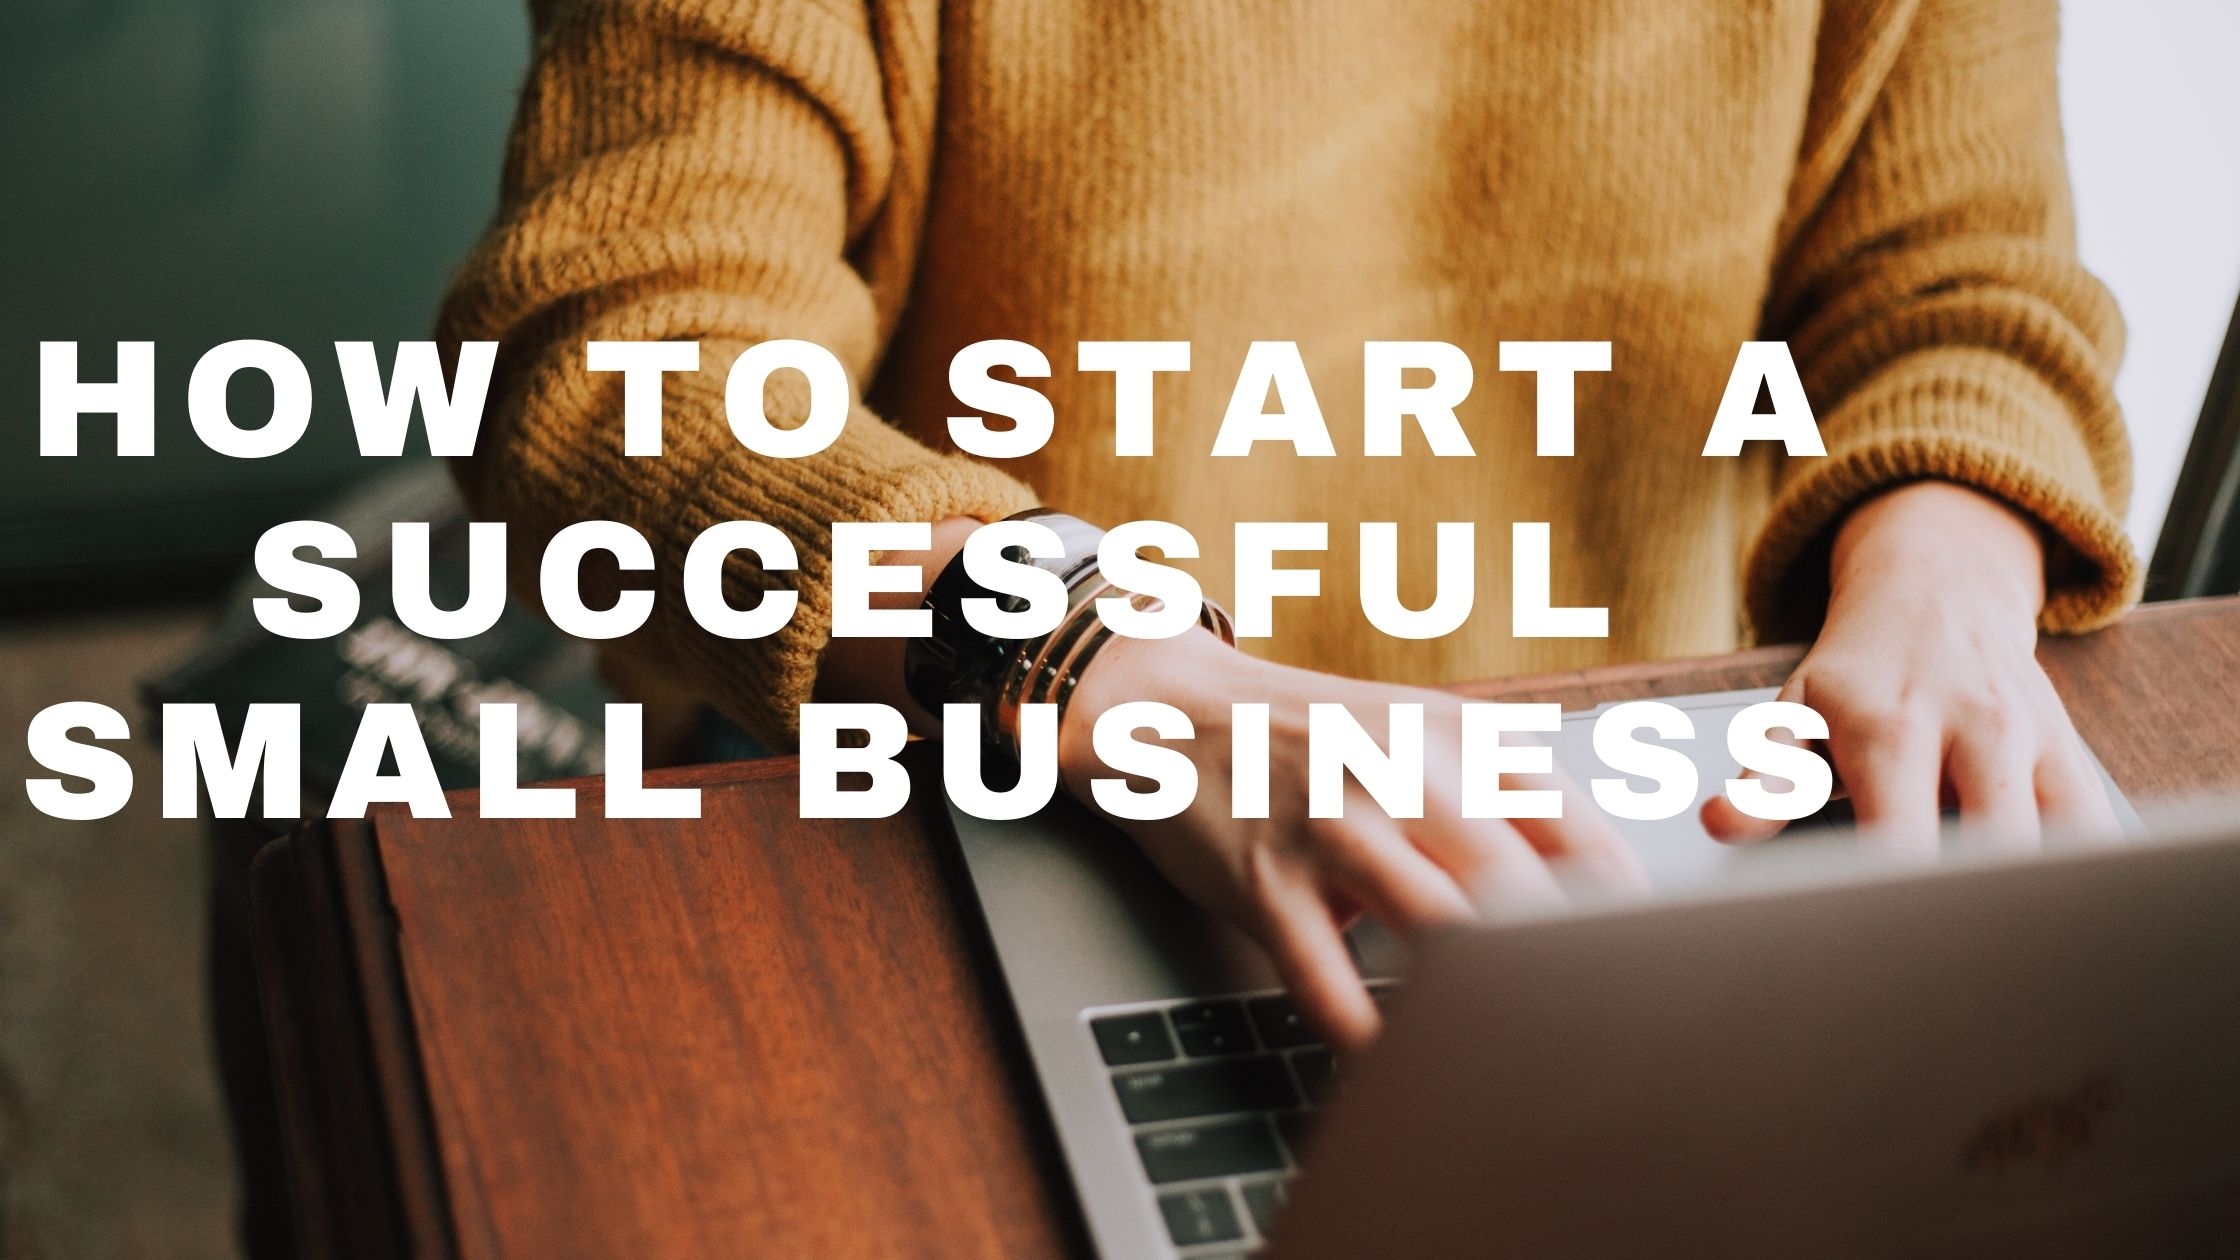 public/uploads/2021/12/How-to-Start-a-Successful-Small-Business.jpg